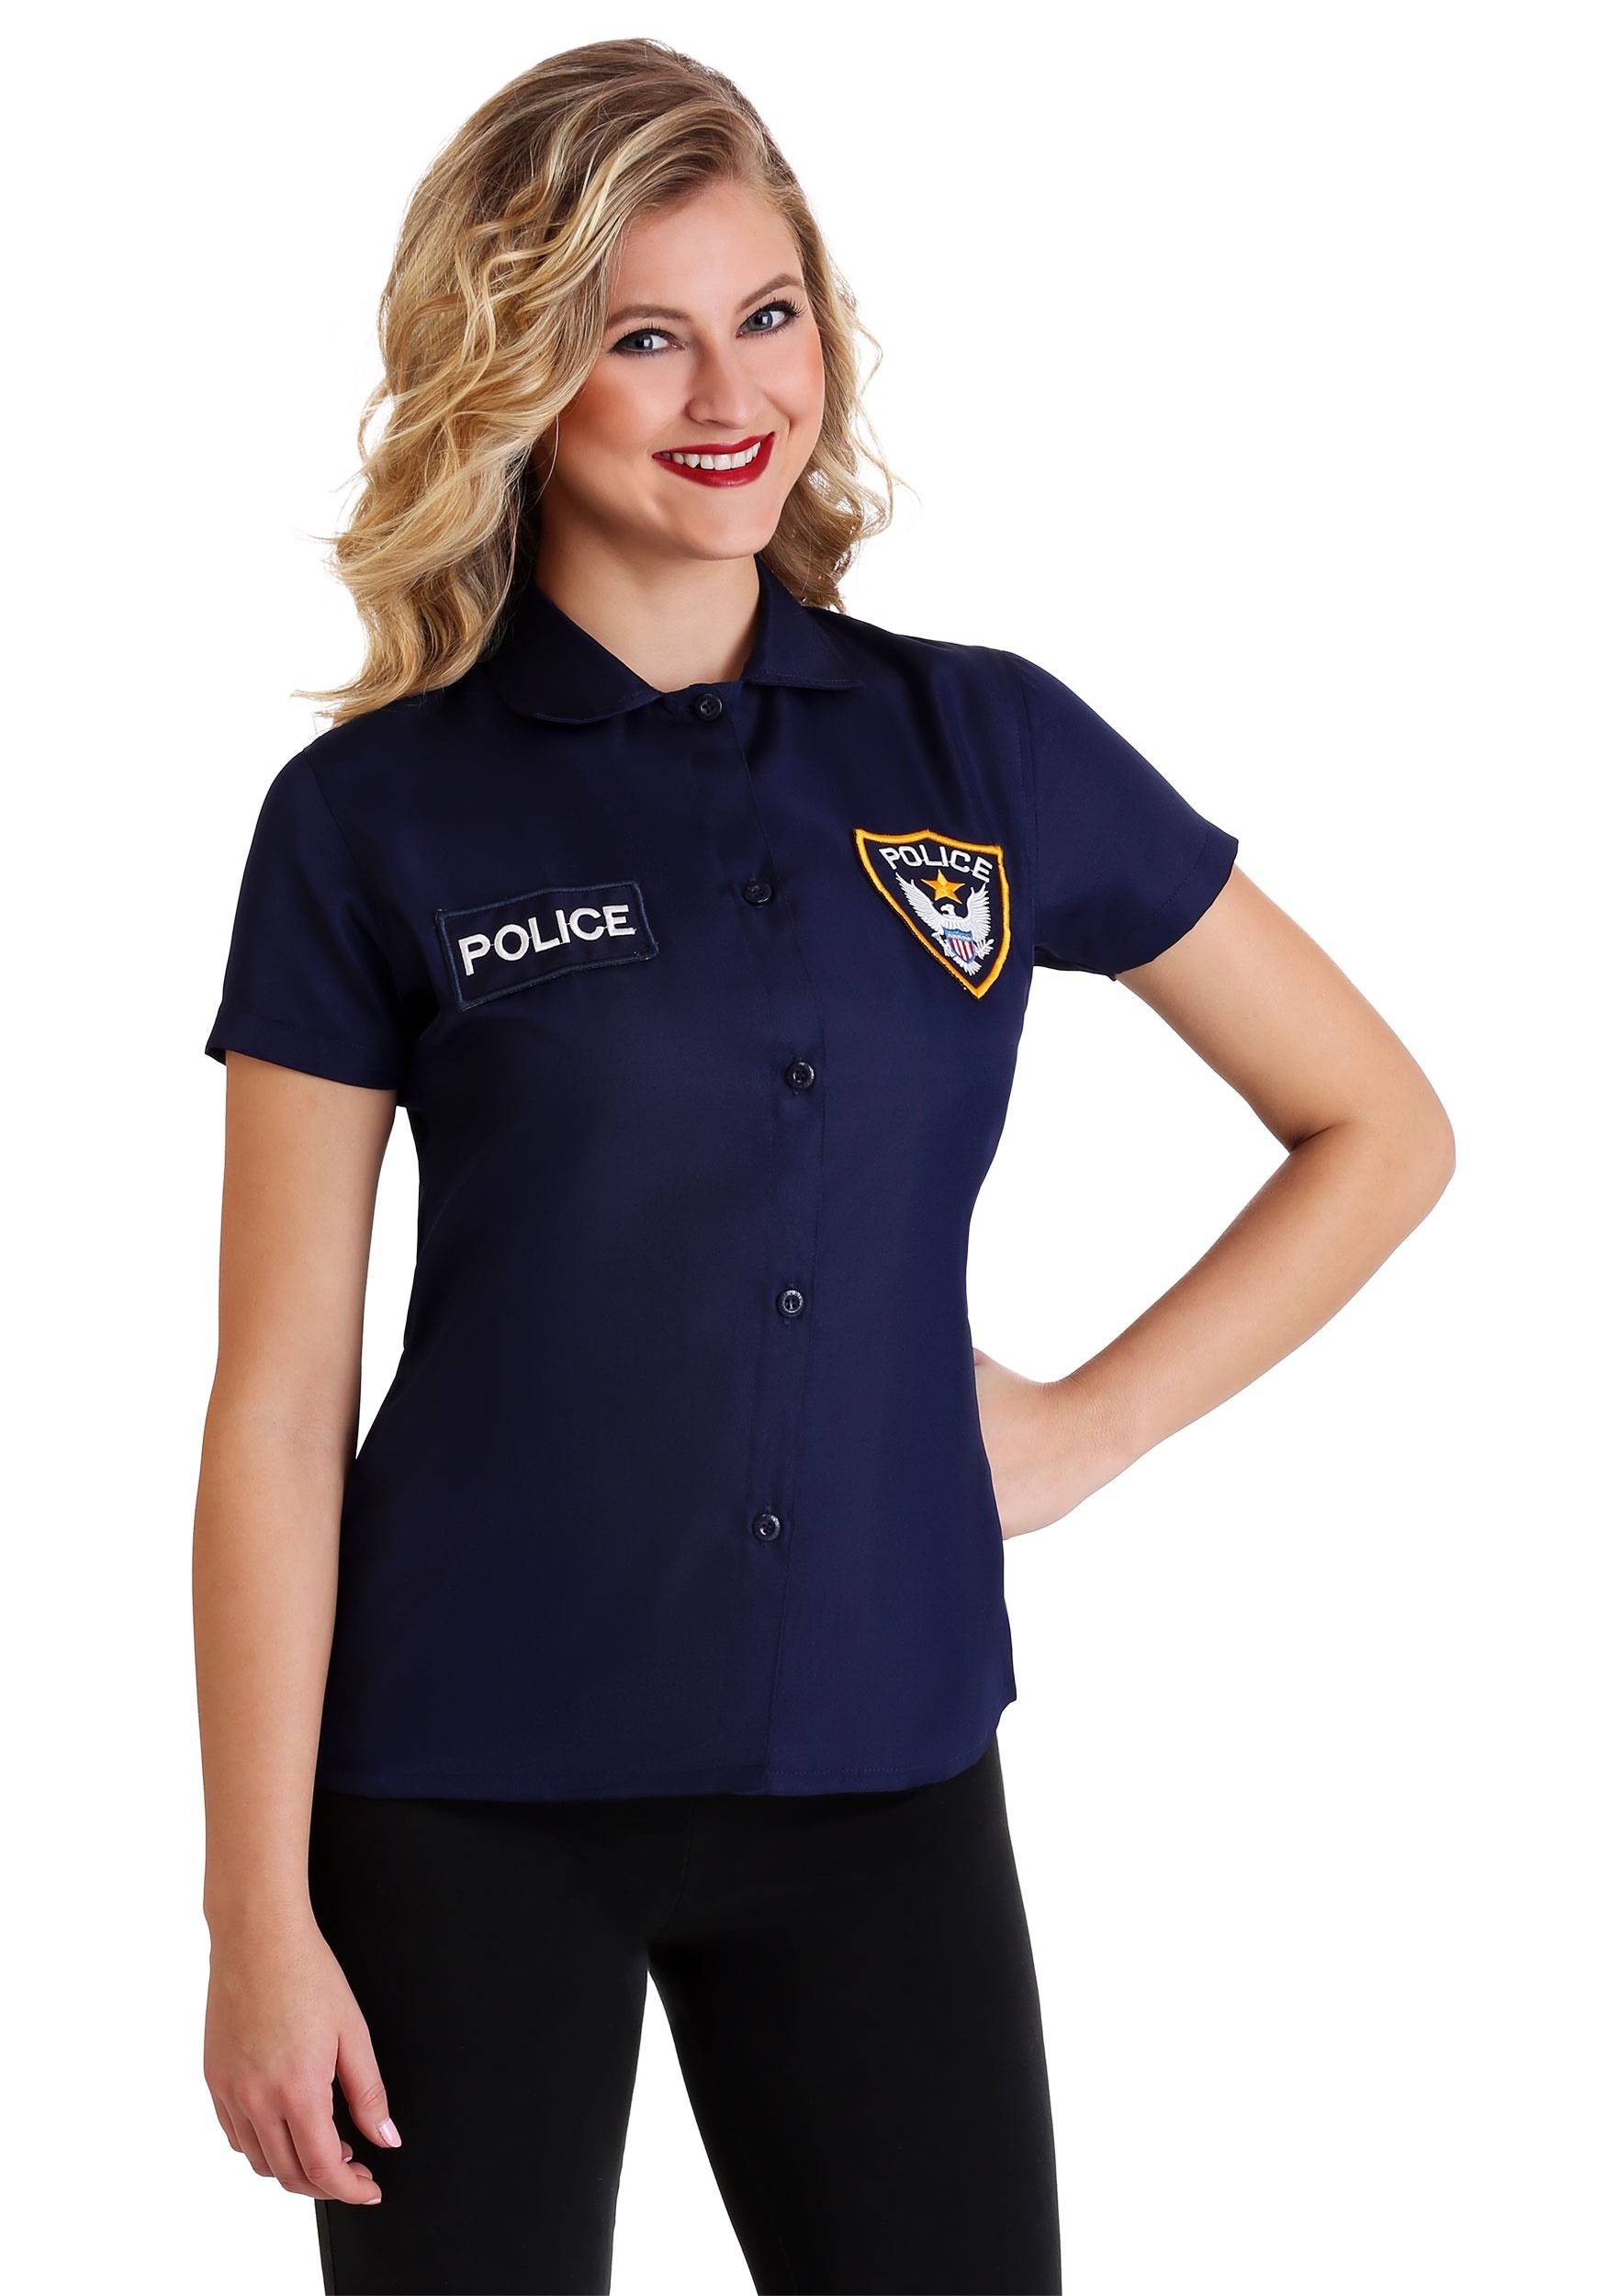 Plus Size Women's Police Shirt Costume , Adult Costume T-Shirts